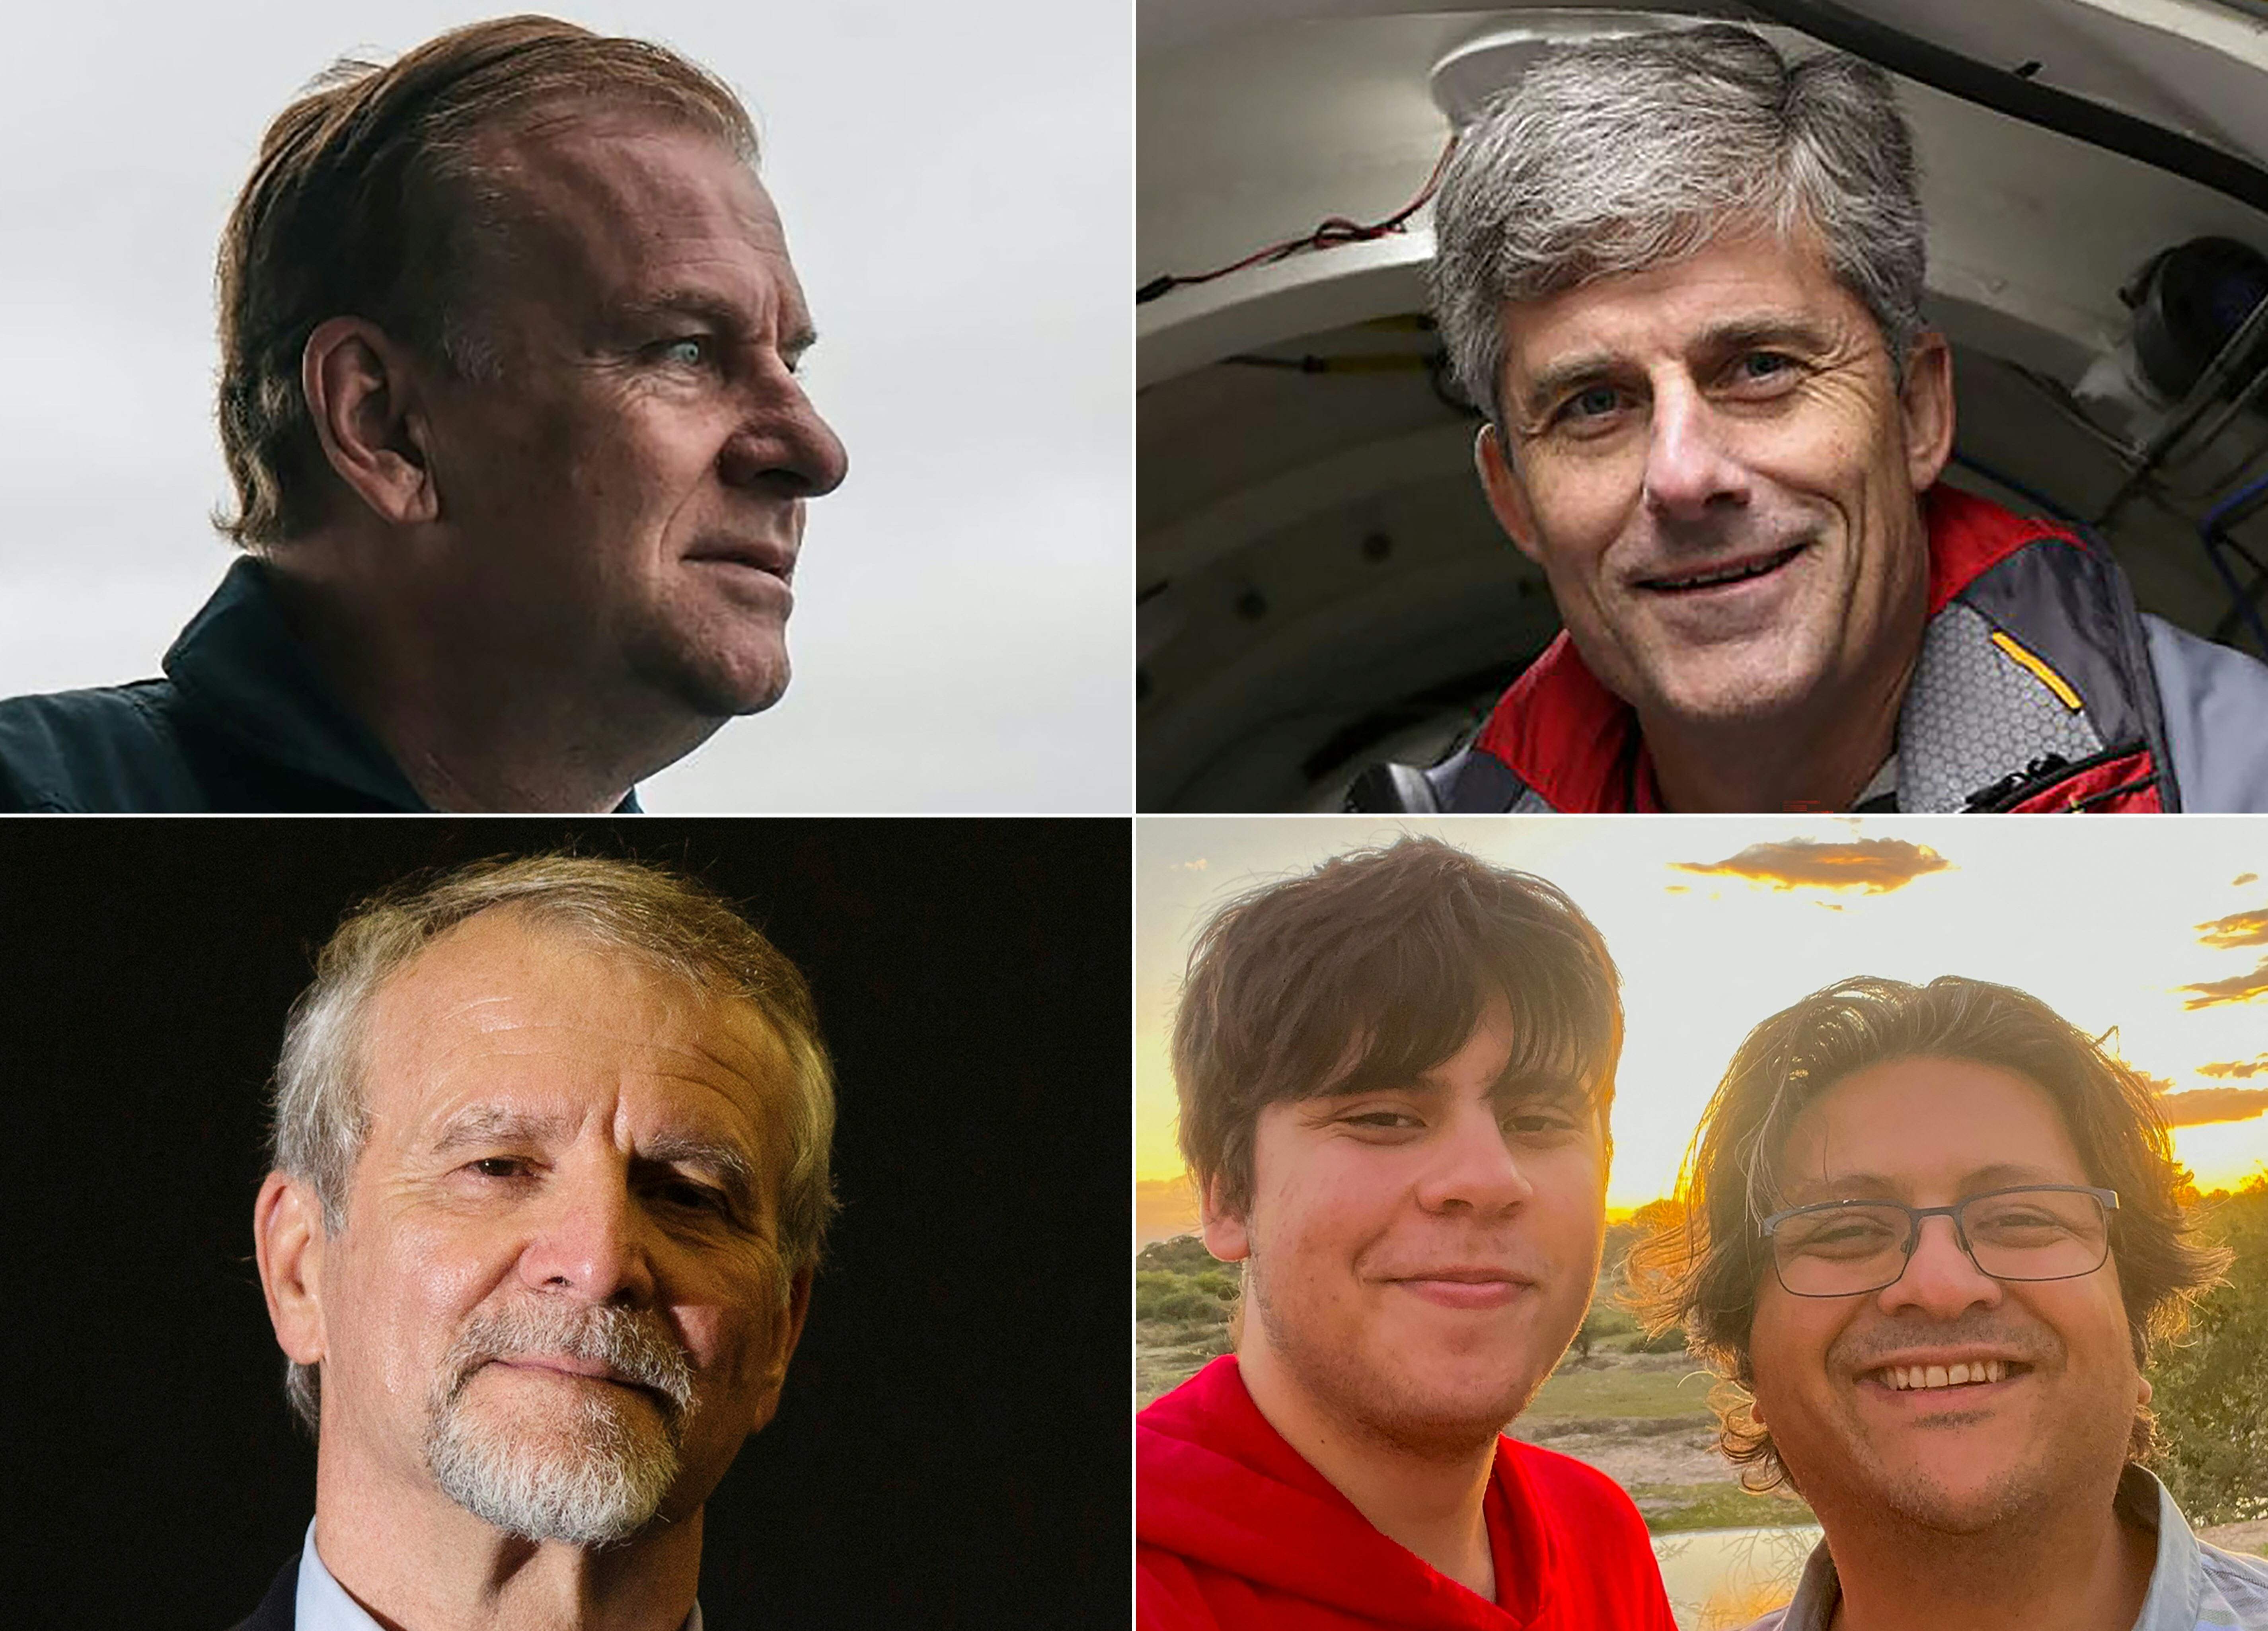 The five crew members confirmed to have died are, clockwise from top left, Hamish Harding, Stockton Rush, Shahzada and Suleman Dawood, and Paul-Henri Nargeolet. Cameron called the death of his close friend Nargeolet ‘impossible to fathom’